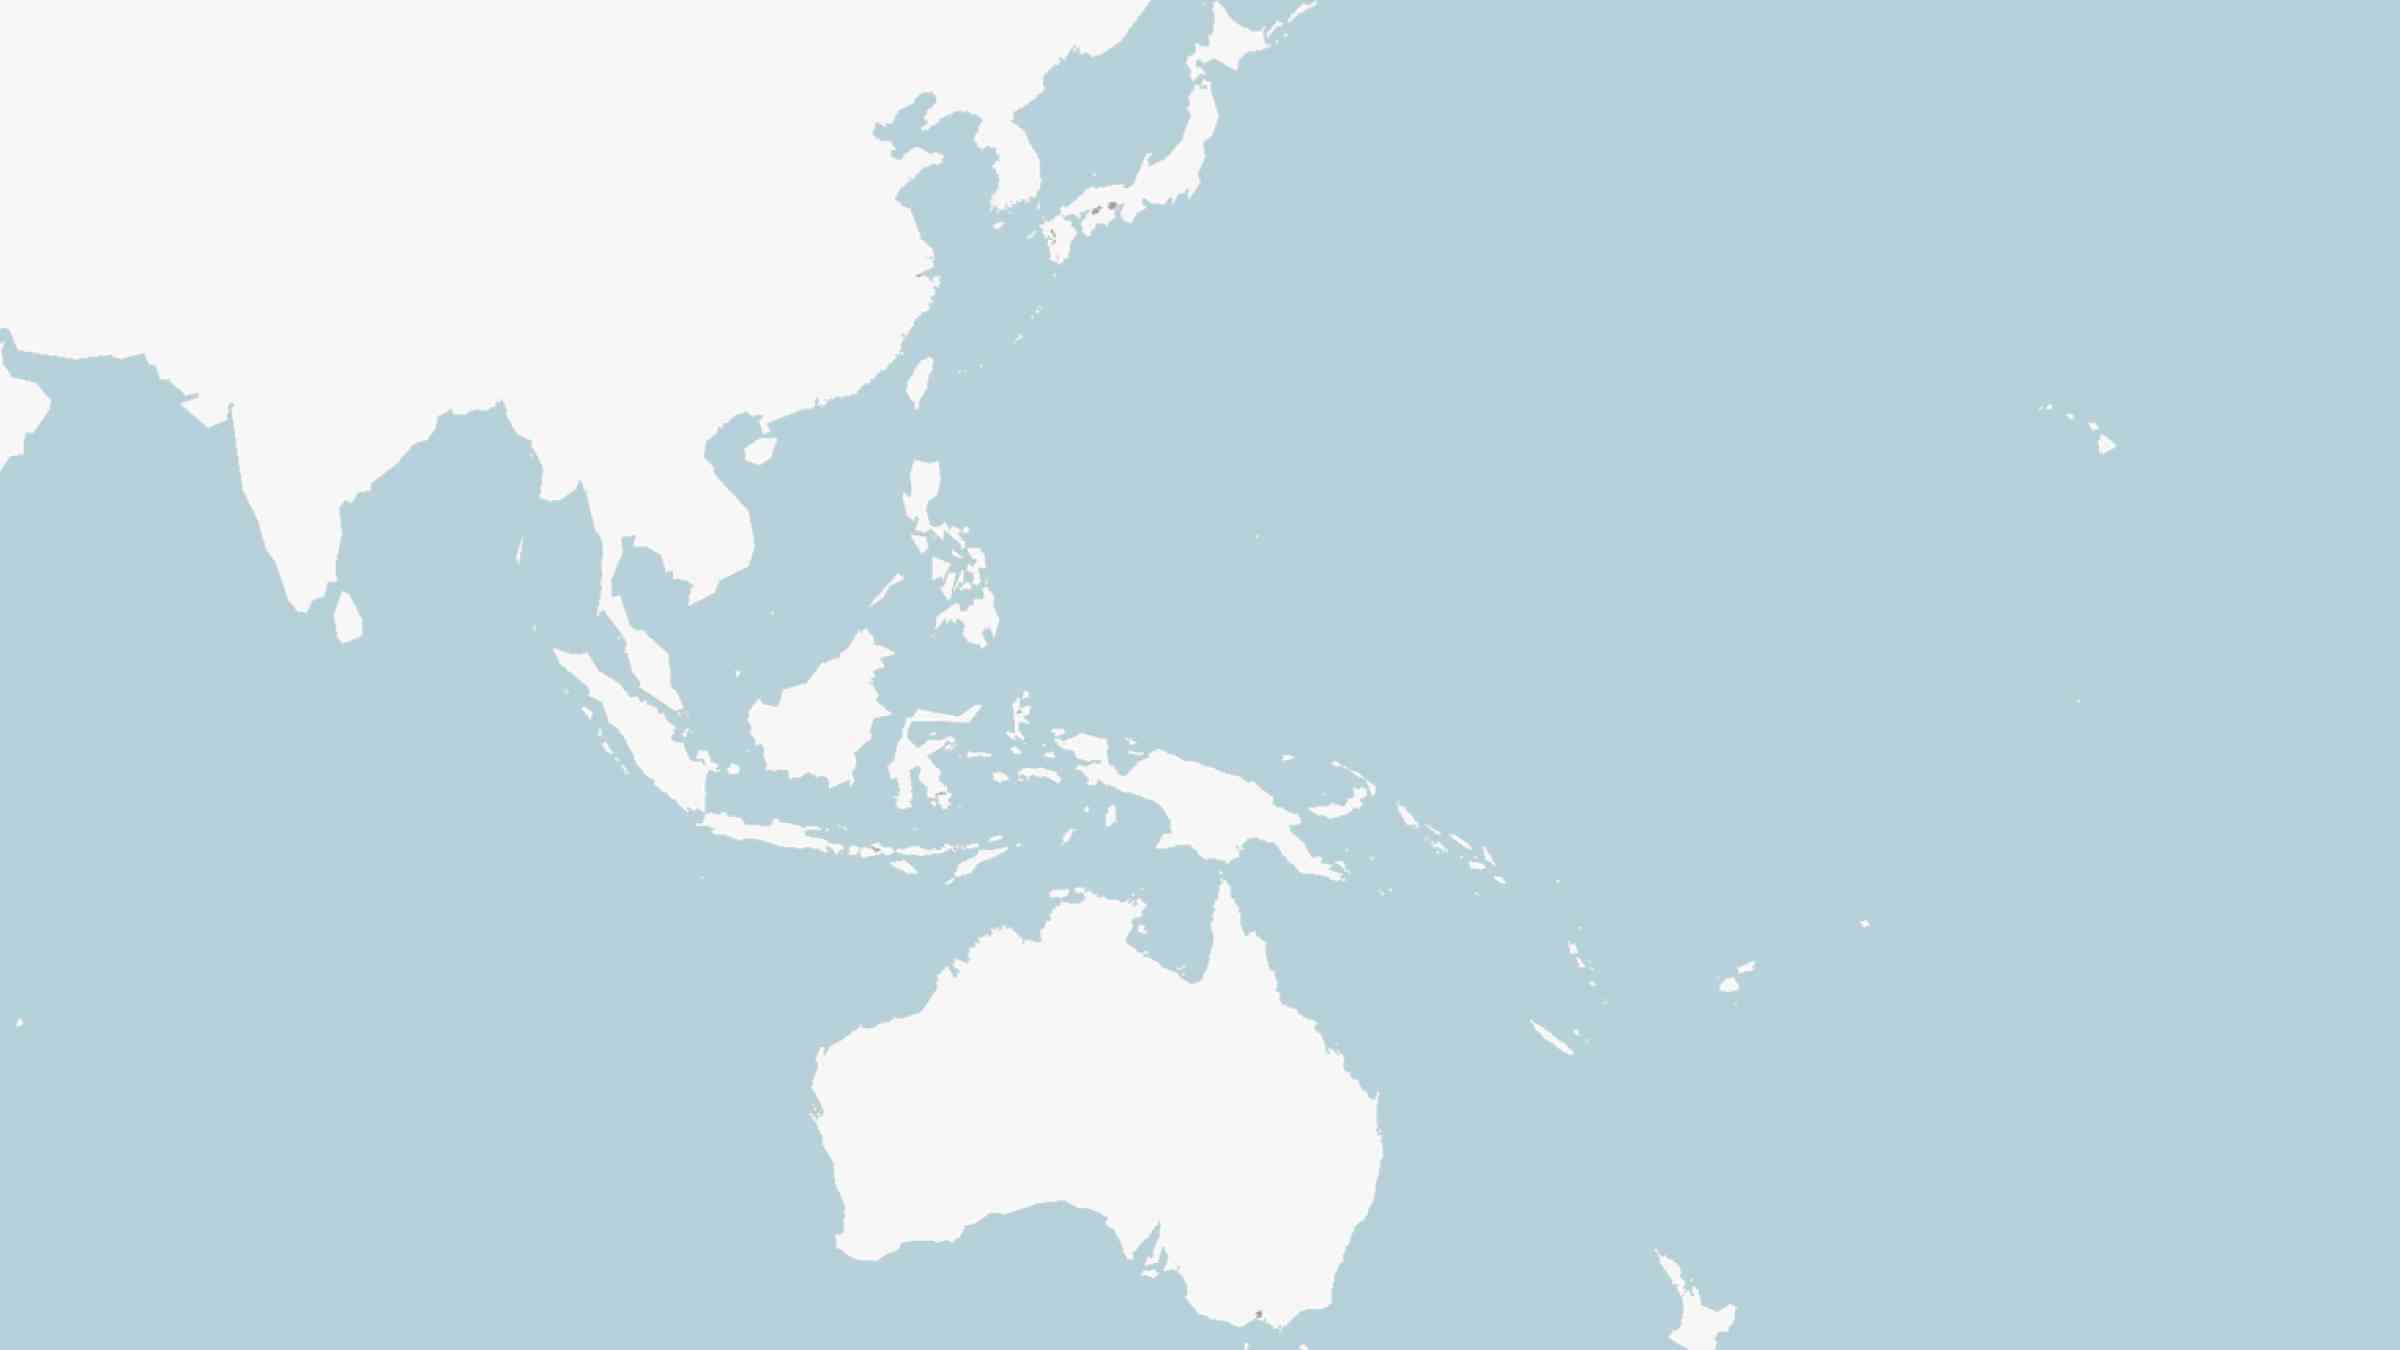 A blank map of Asia and the Pacific region with a blue background 